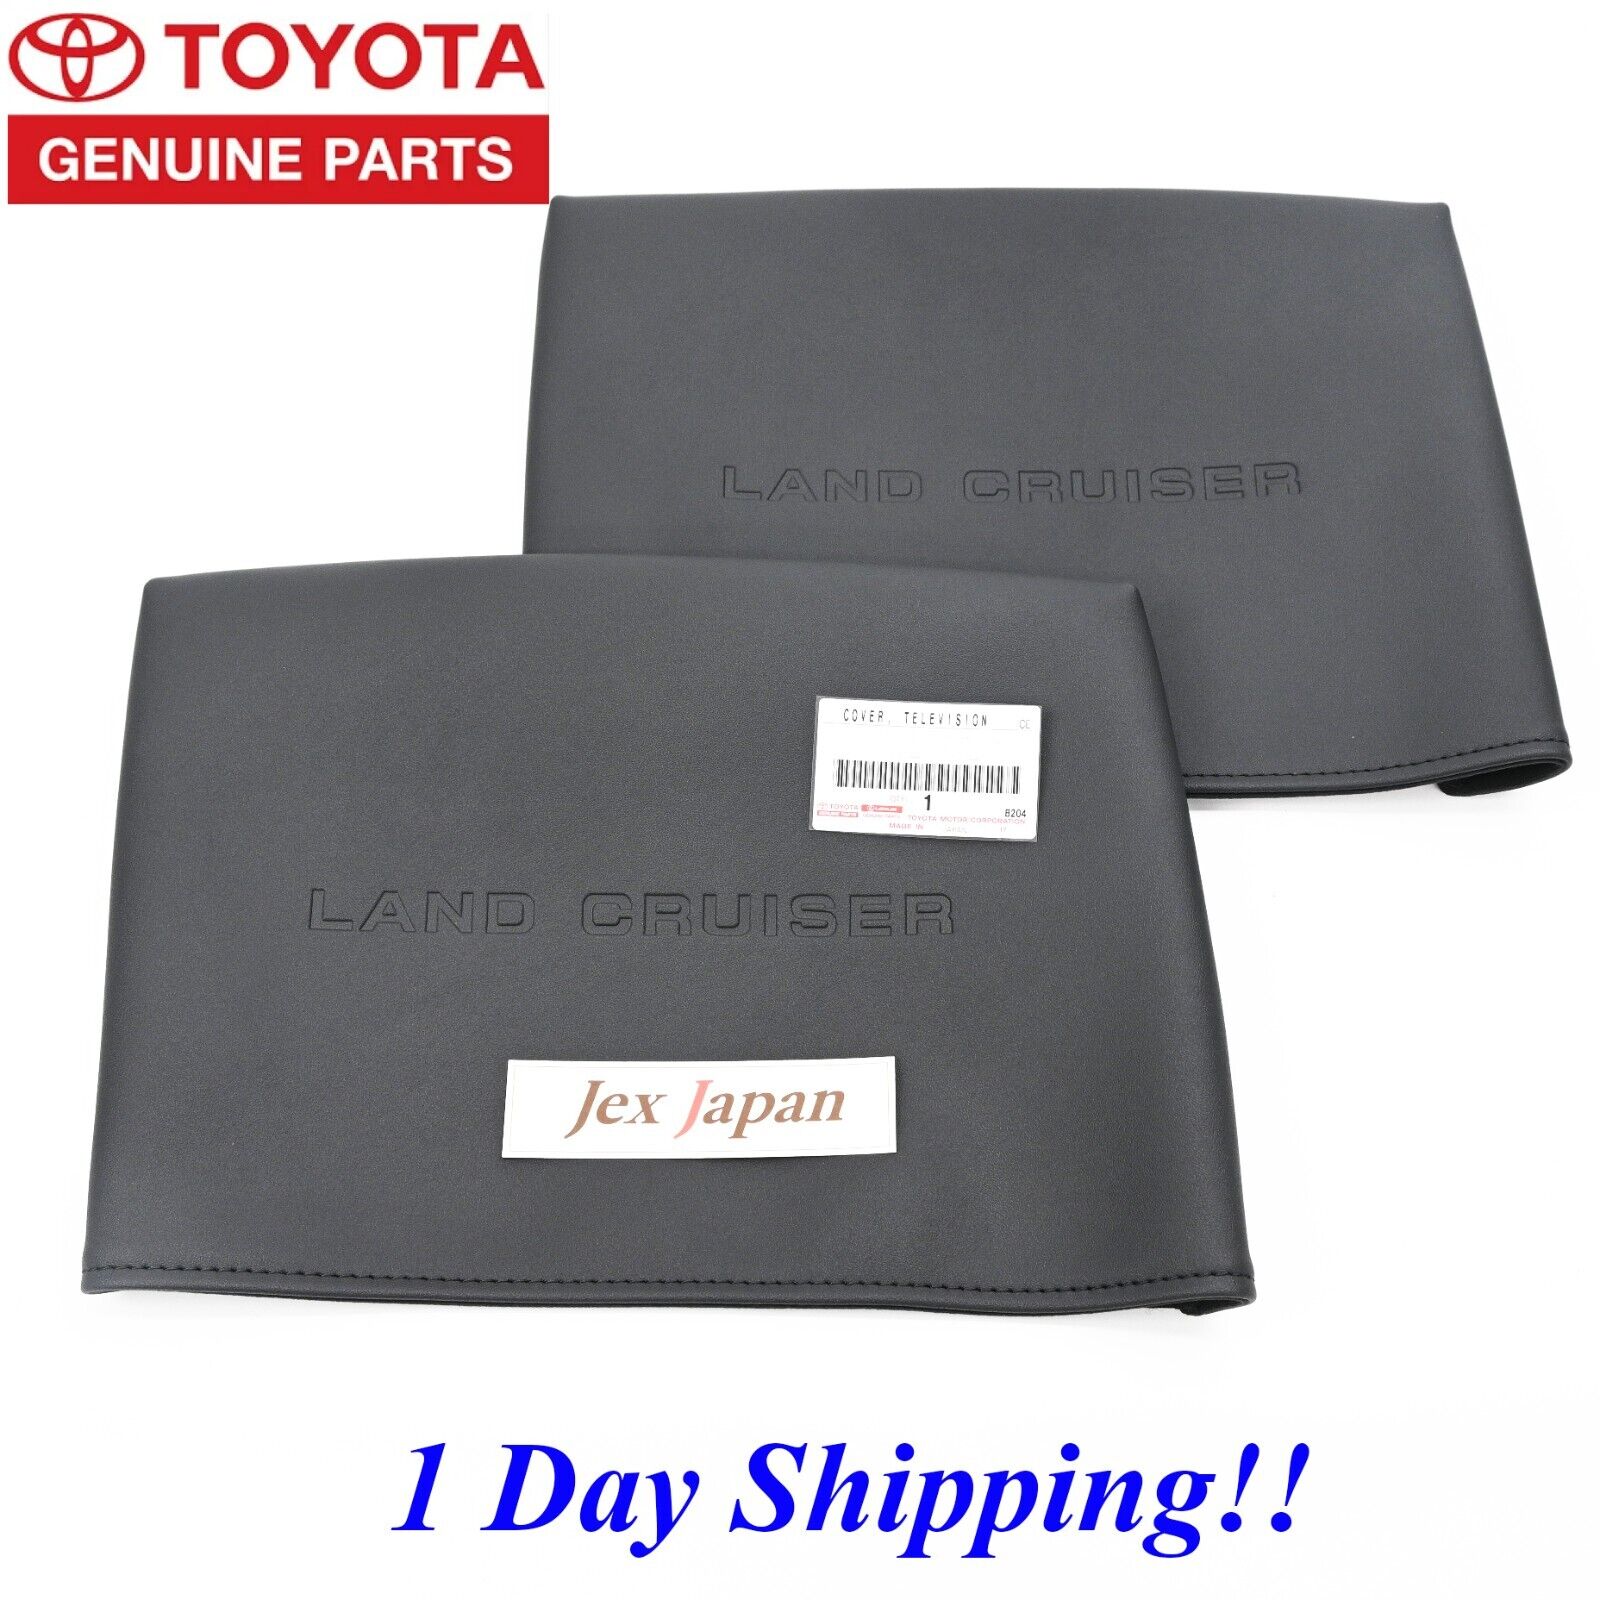 Toyota Genuine Land Cruiser 300 200 Rear Entertainment Monitor Cover set of 2